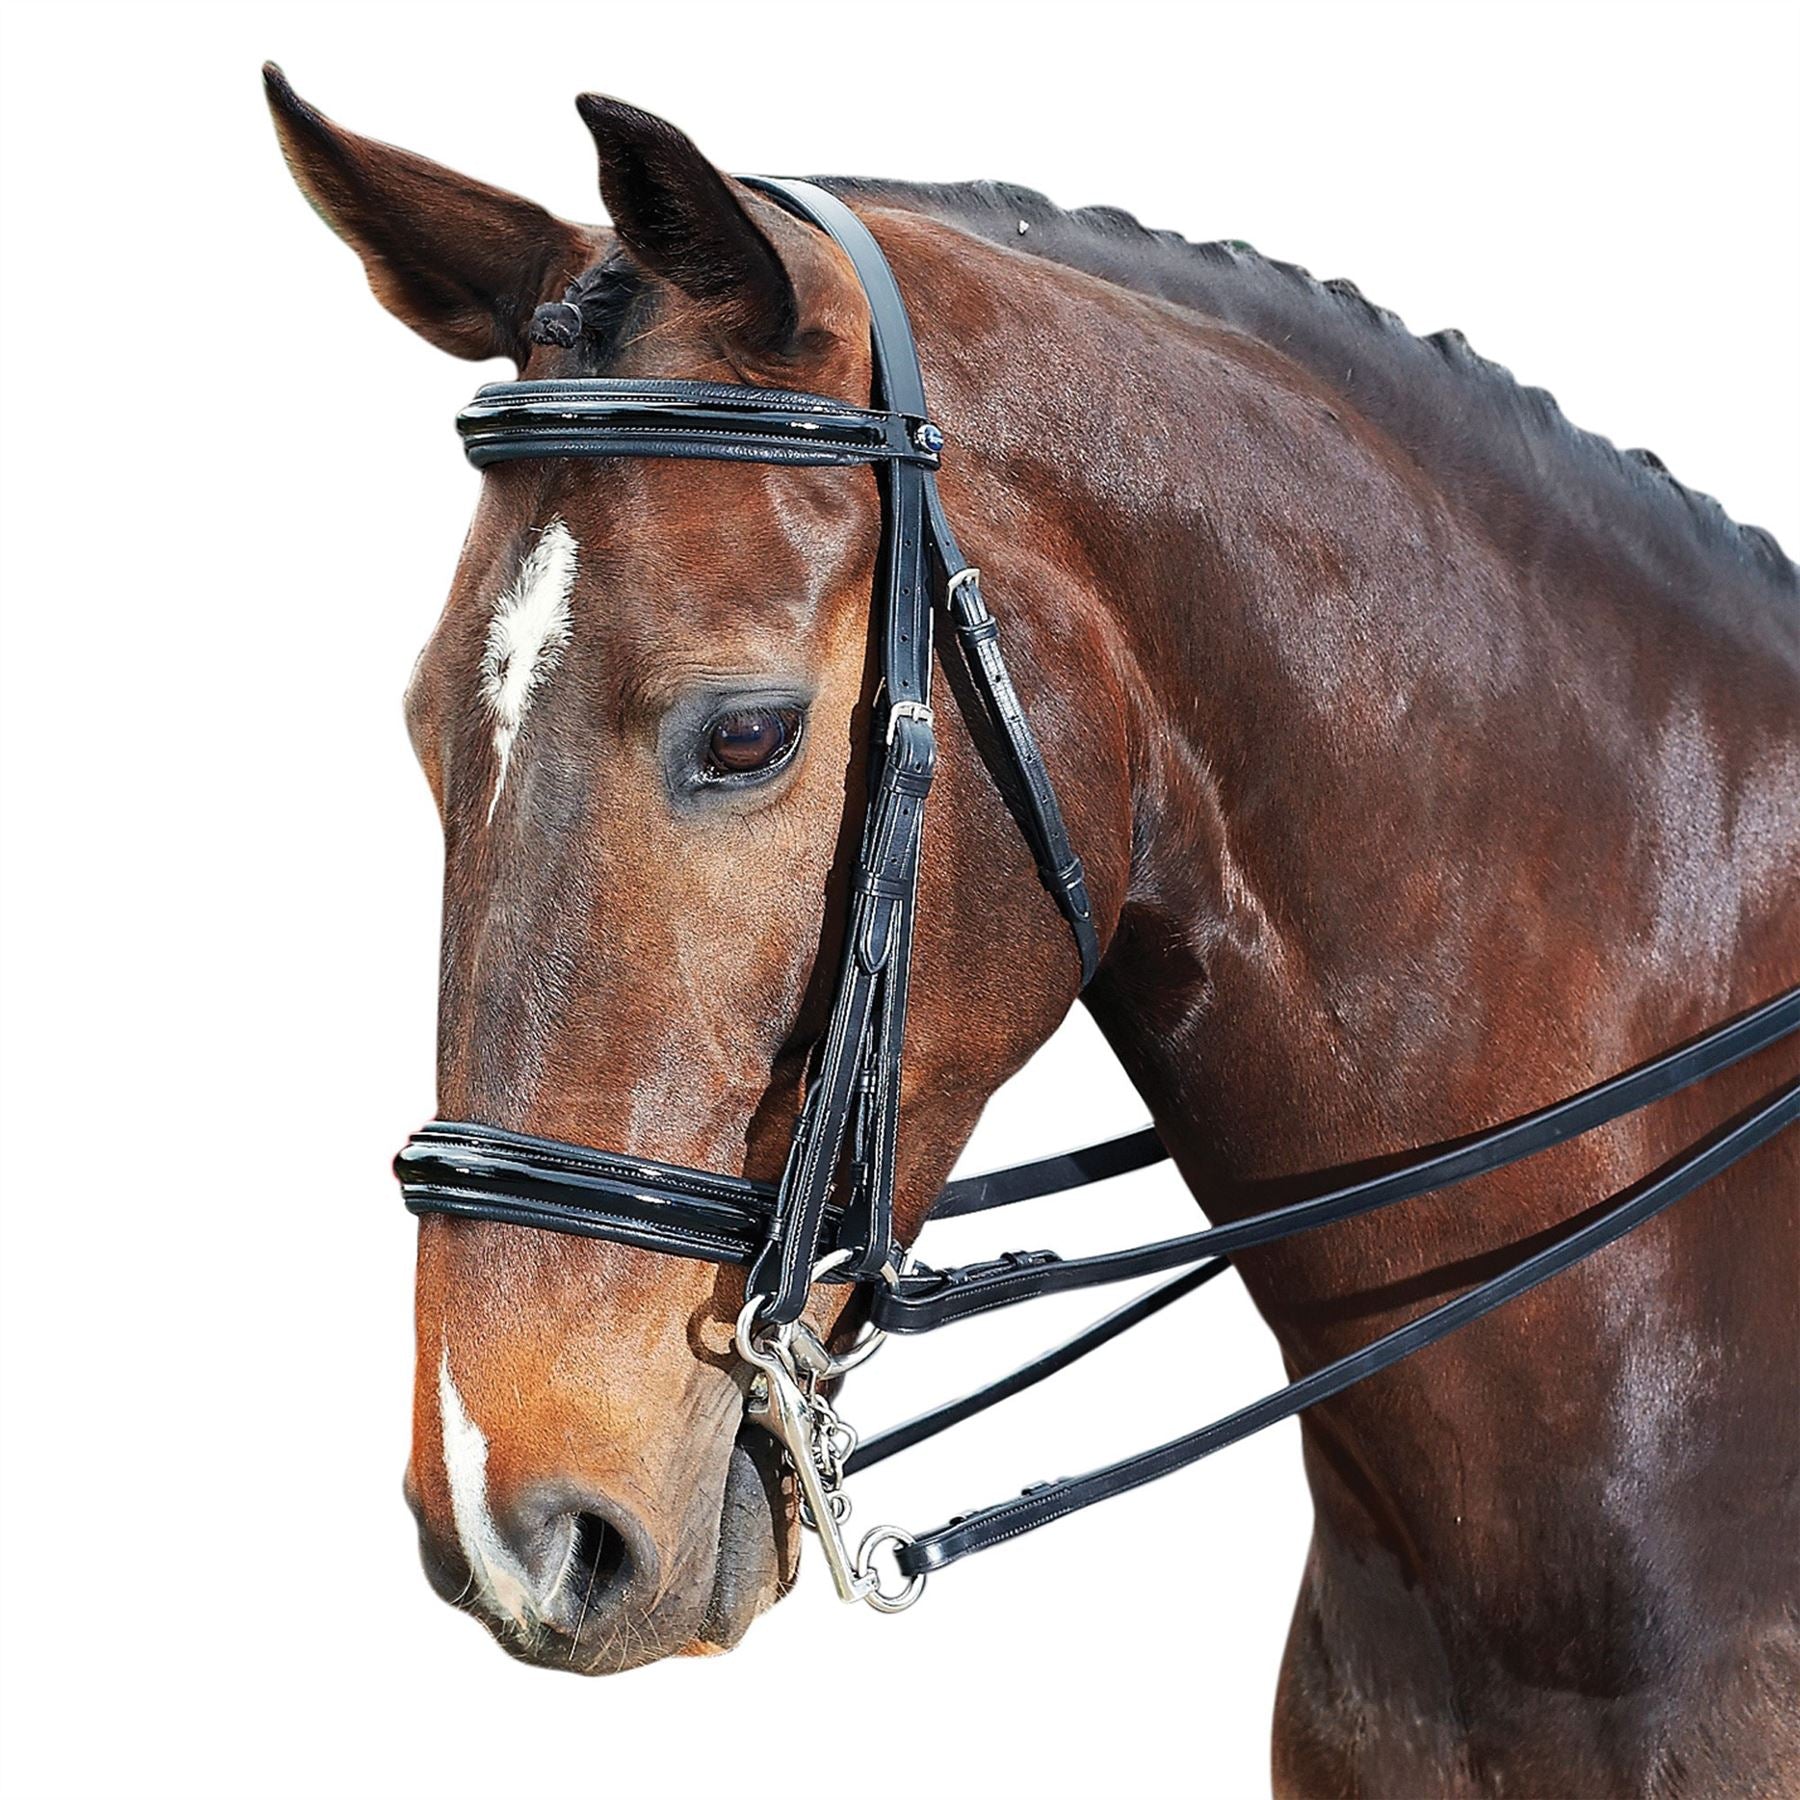 Collegiate Raised Patent Weymouth Bridle - Just Horse Riders